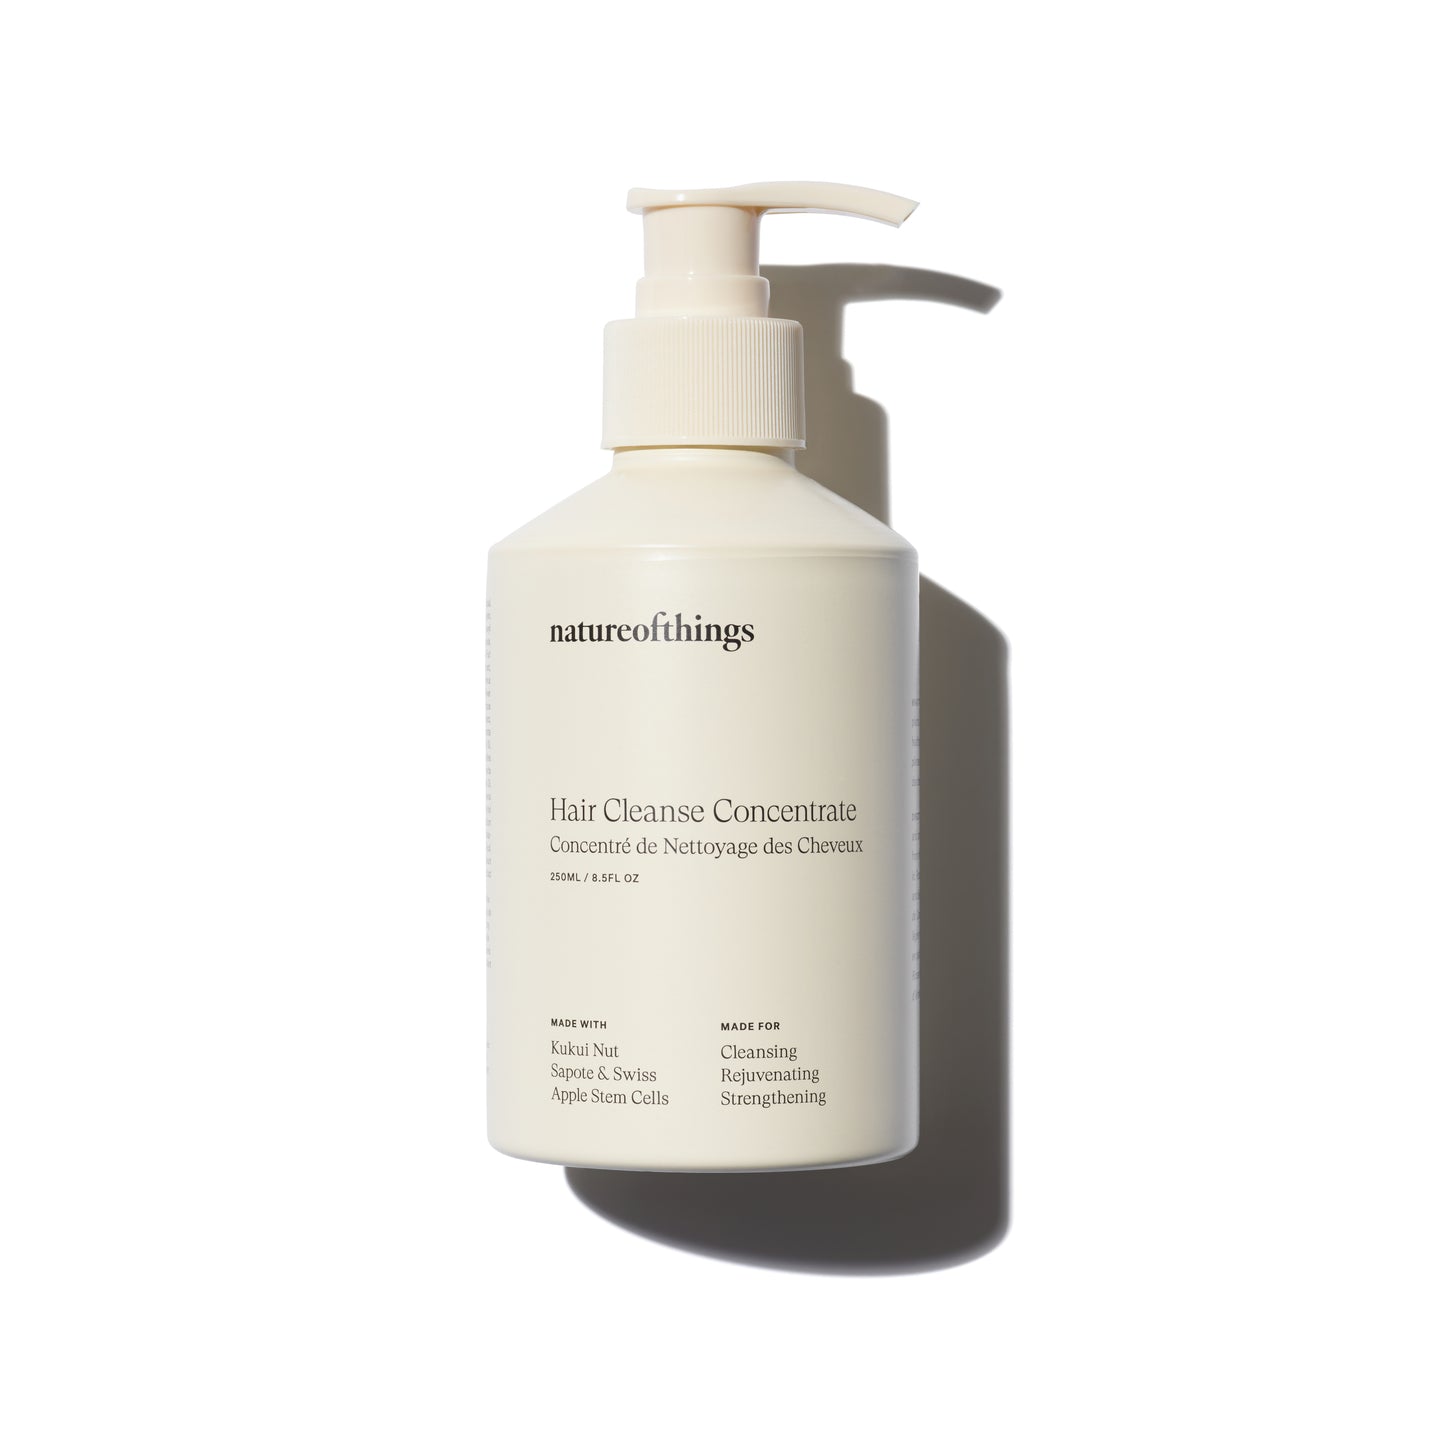 NATUREOFTHINGS-Hair-Cleanse-Concentrate